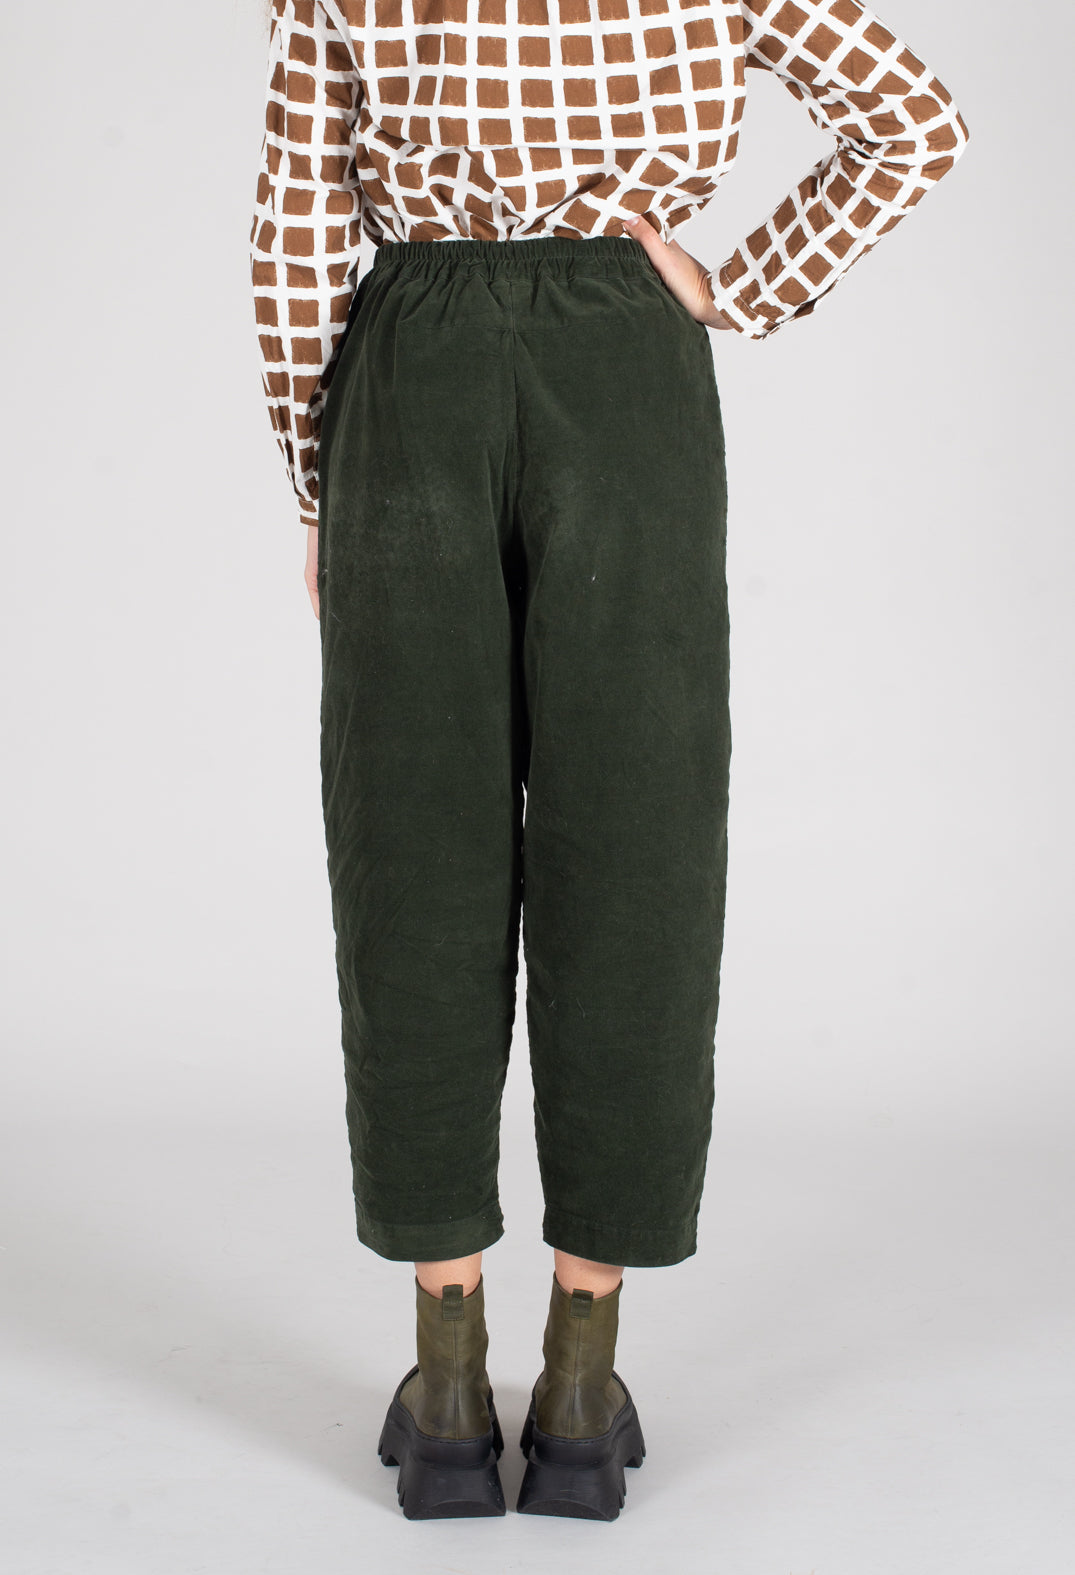 Pedra Pants in Olive